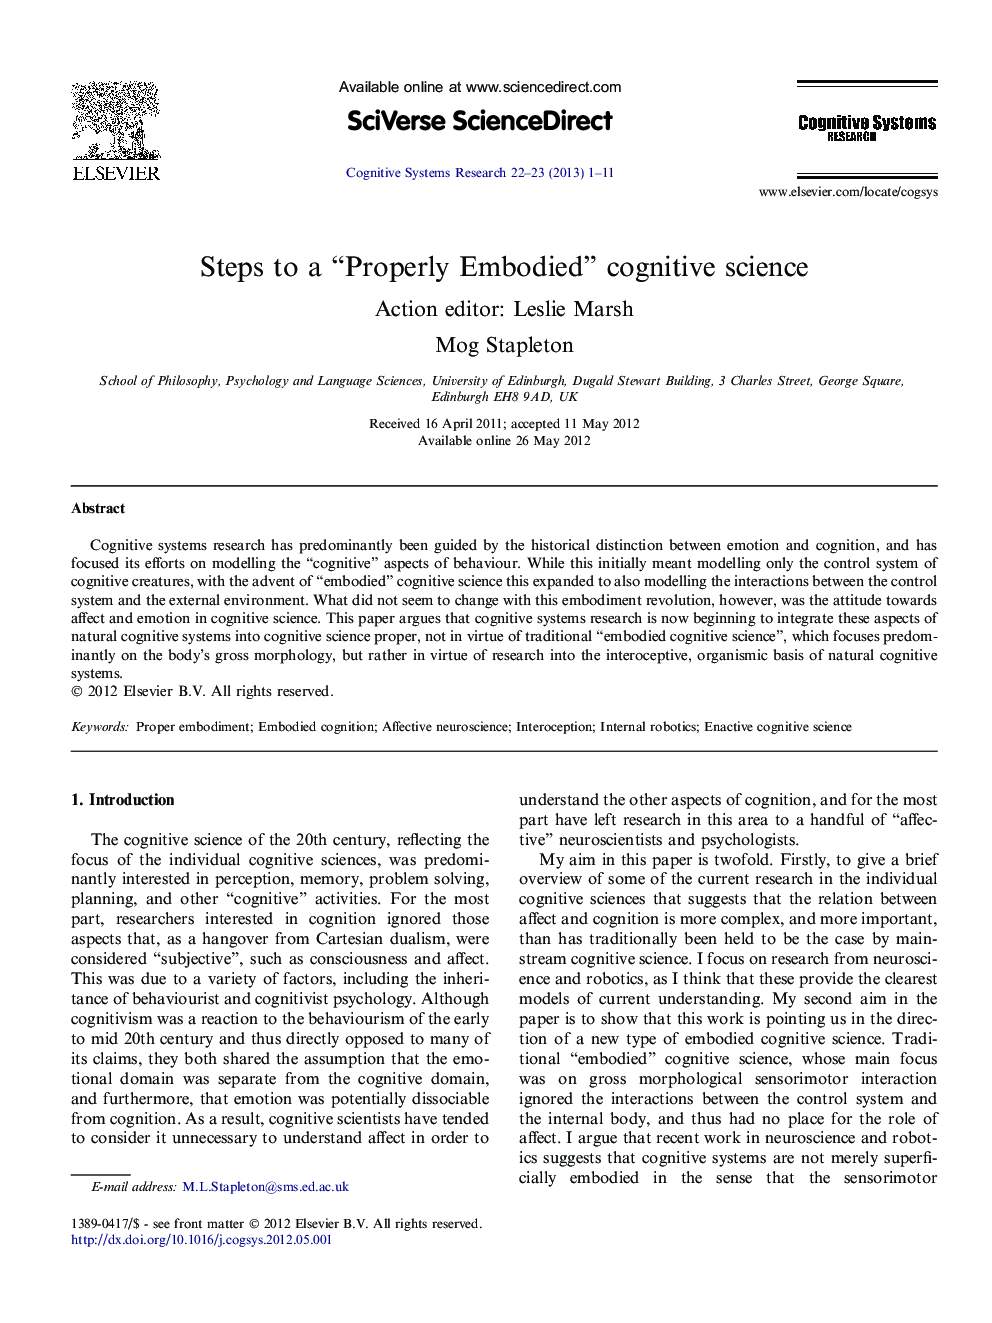 Steps to a “Properly Embodied” cognitive science